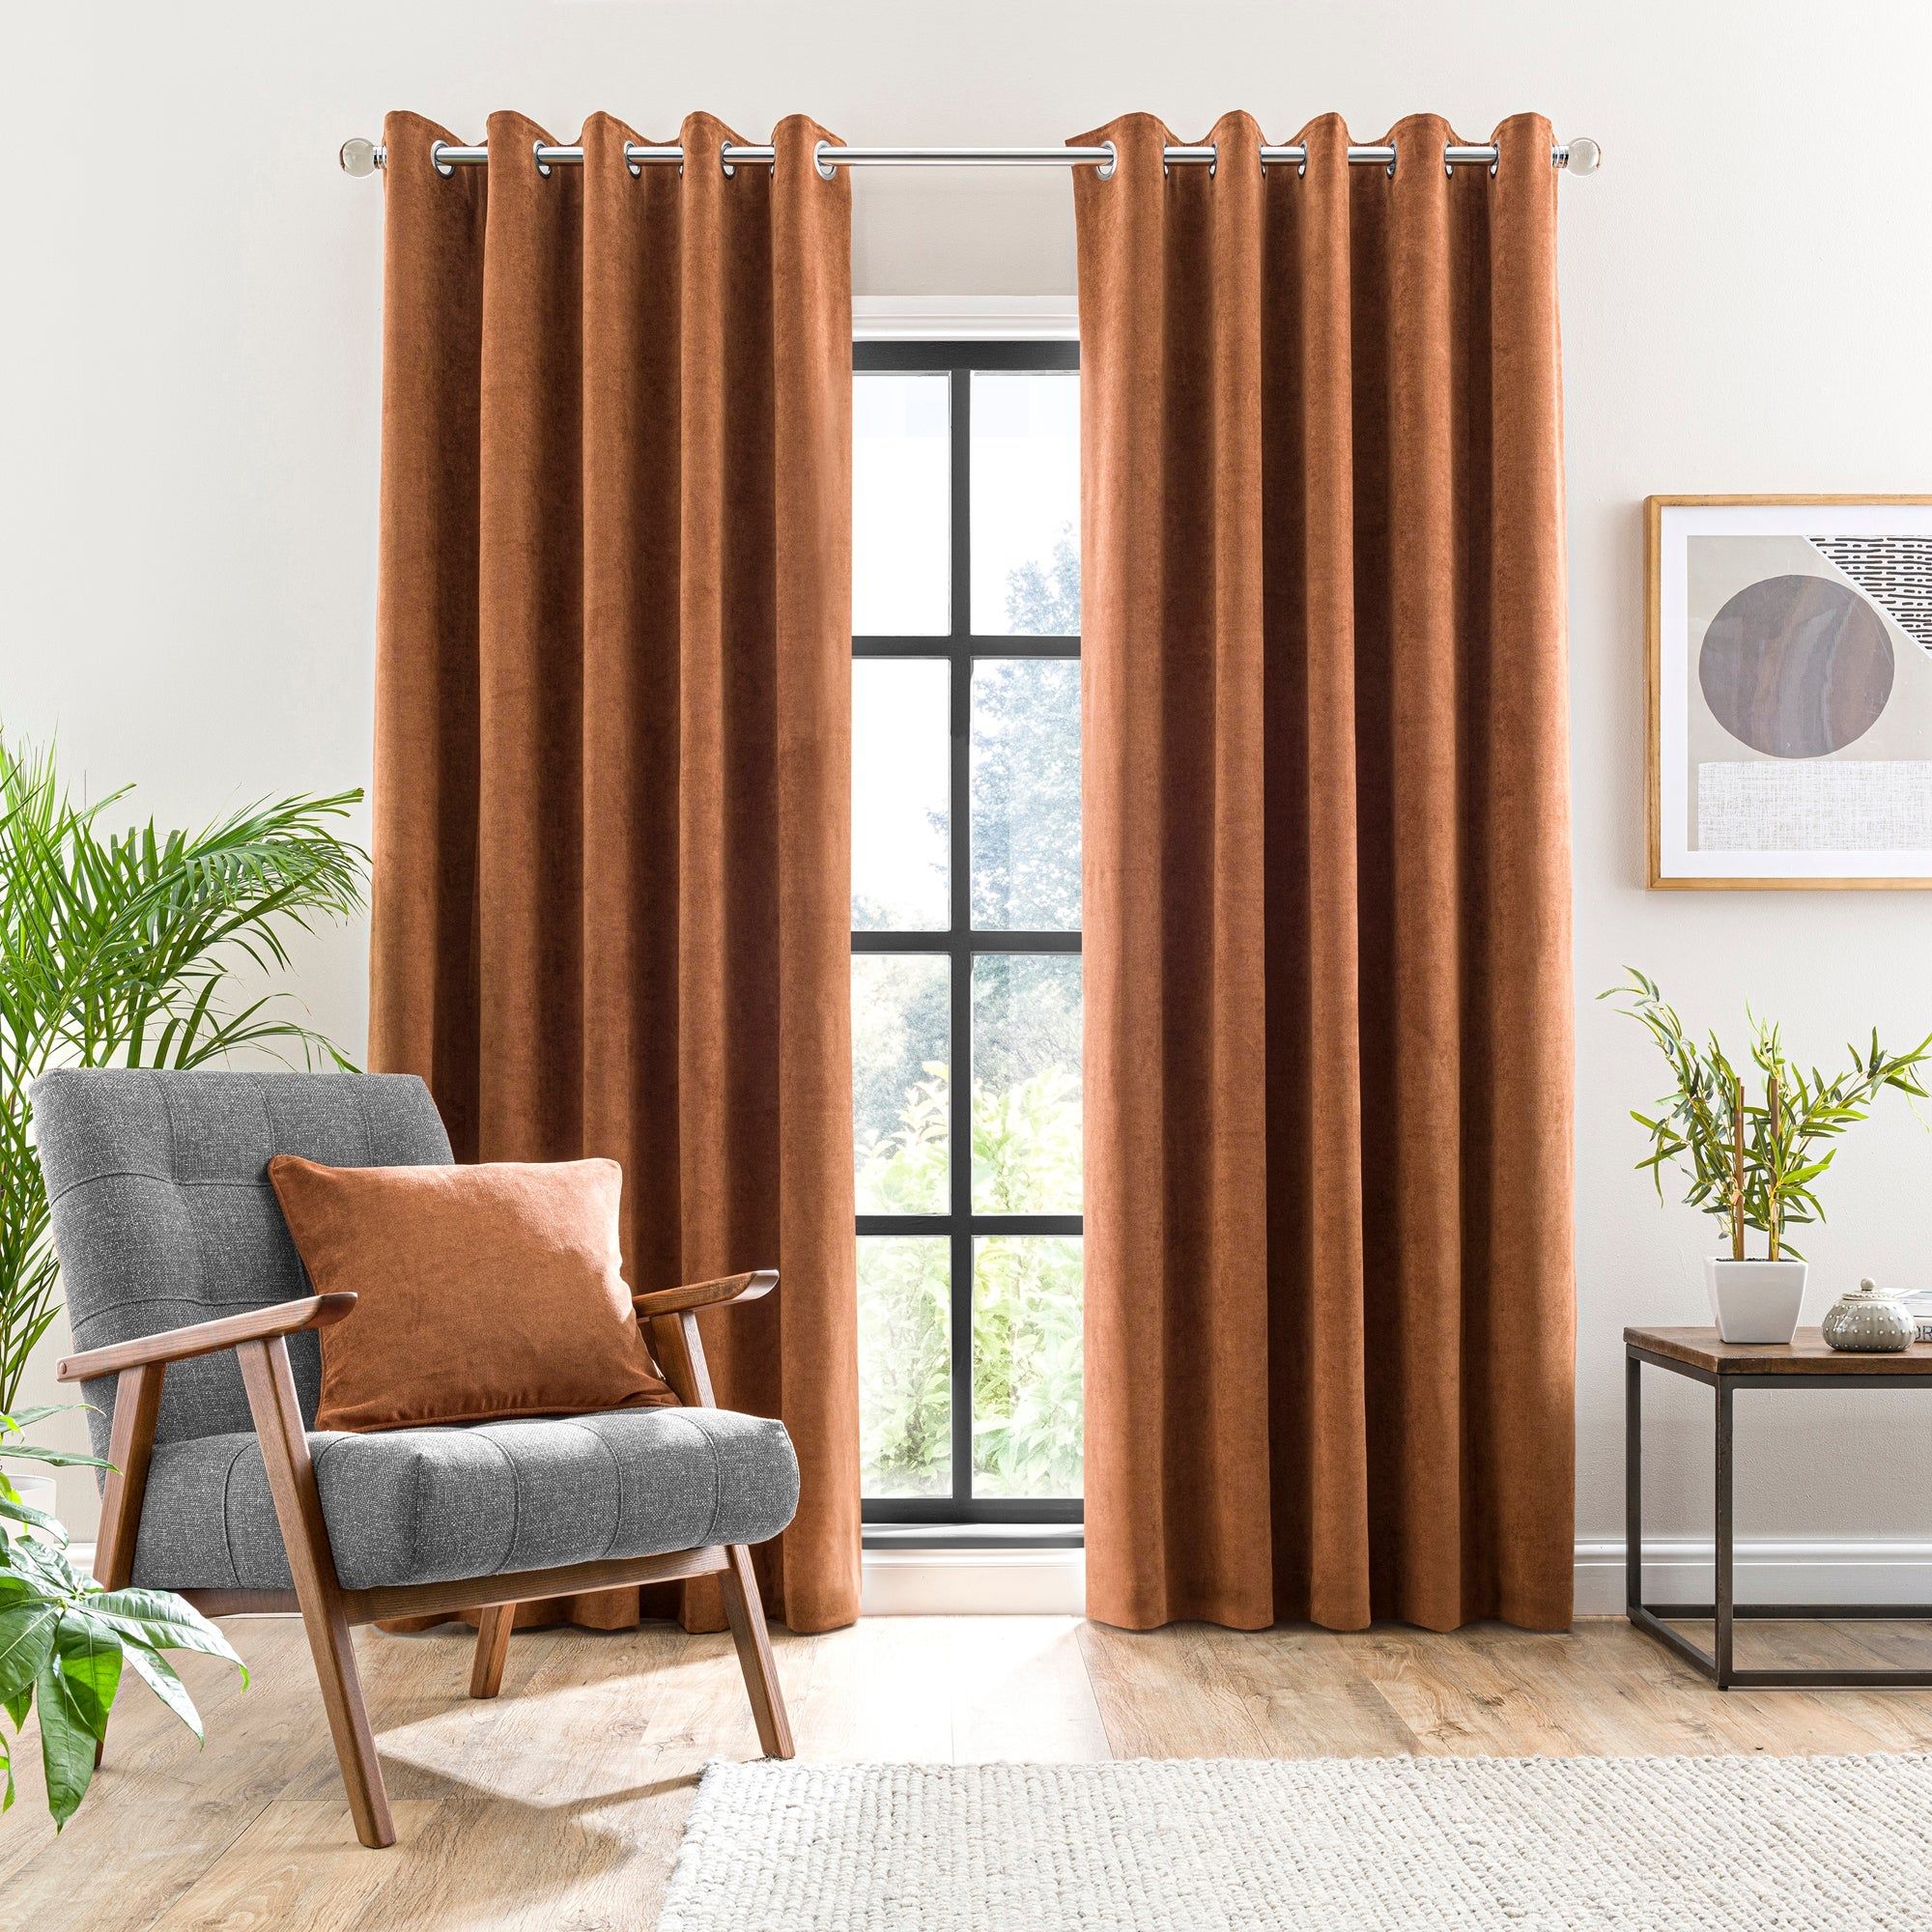 Add a Touch of Elegance with Eyelet Curtains: Stylish and Functional Window Treatments